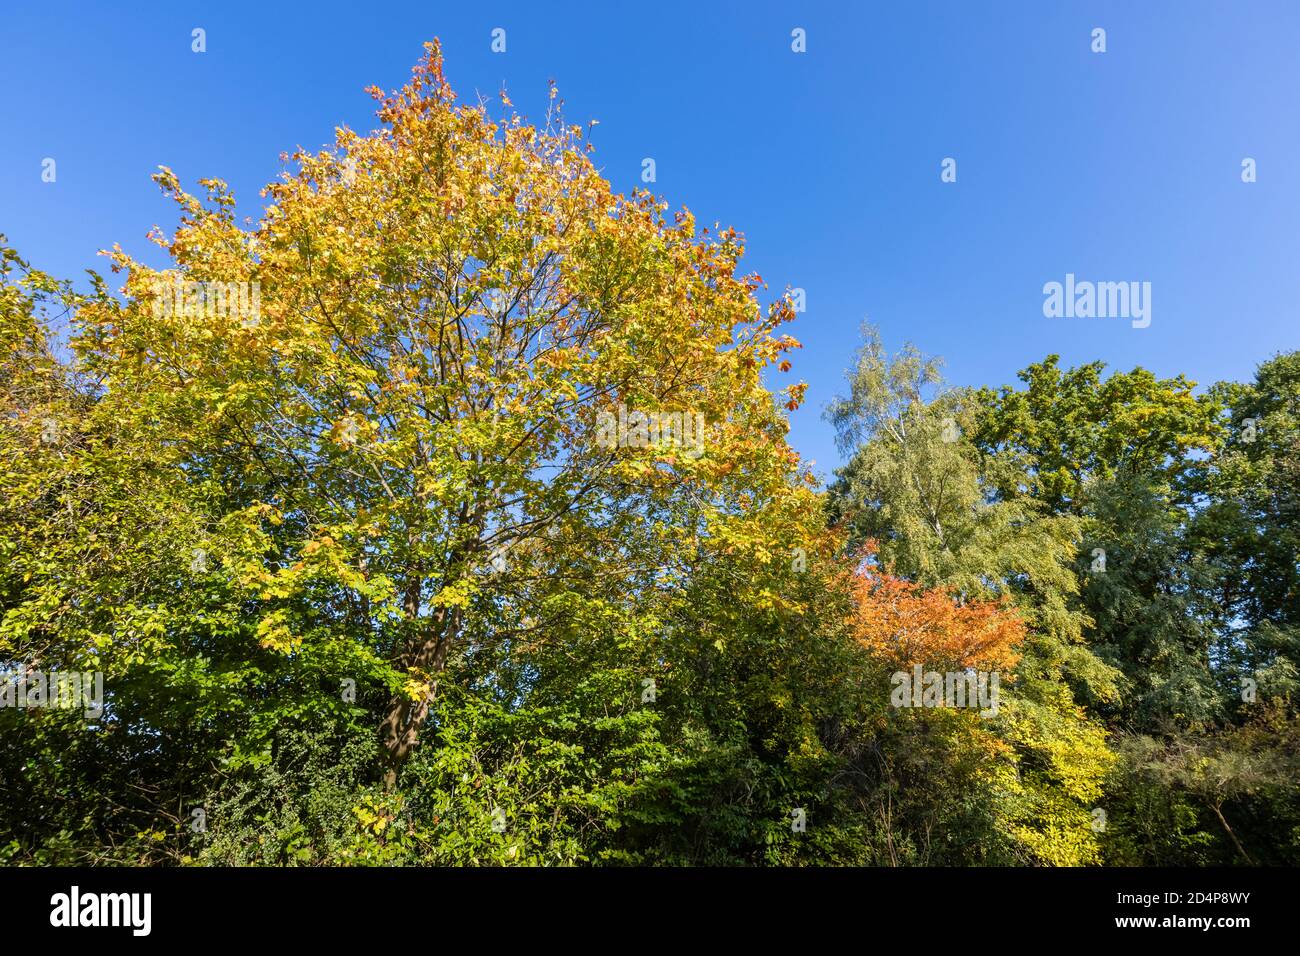 Golden yellow leaves in autumn colours in the crown of a sycamore tree (Acer pseudoplatanus) on a sunny day with a clear blue sky, Surrey, SE England Stock Photo